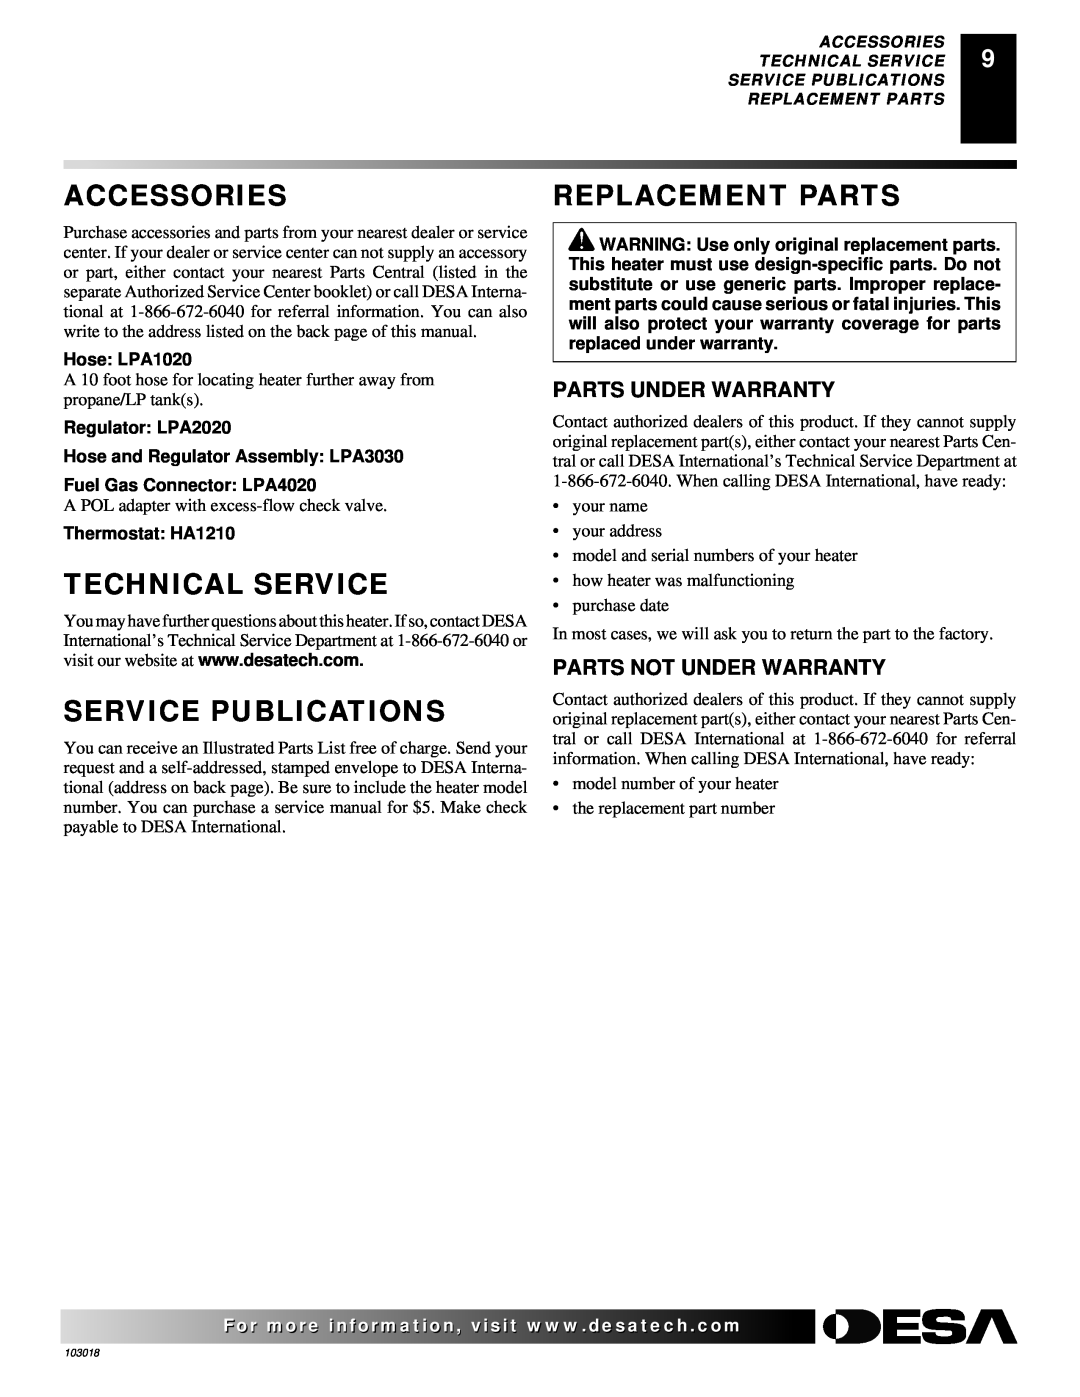 Desa AT Series owner manual Accessories, Replacement Parts, Technical Service, Service Publications 